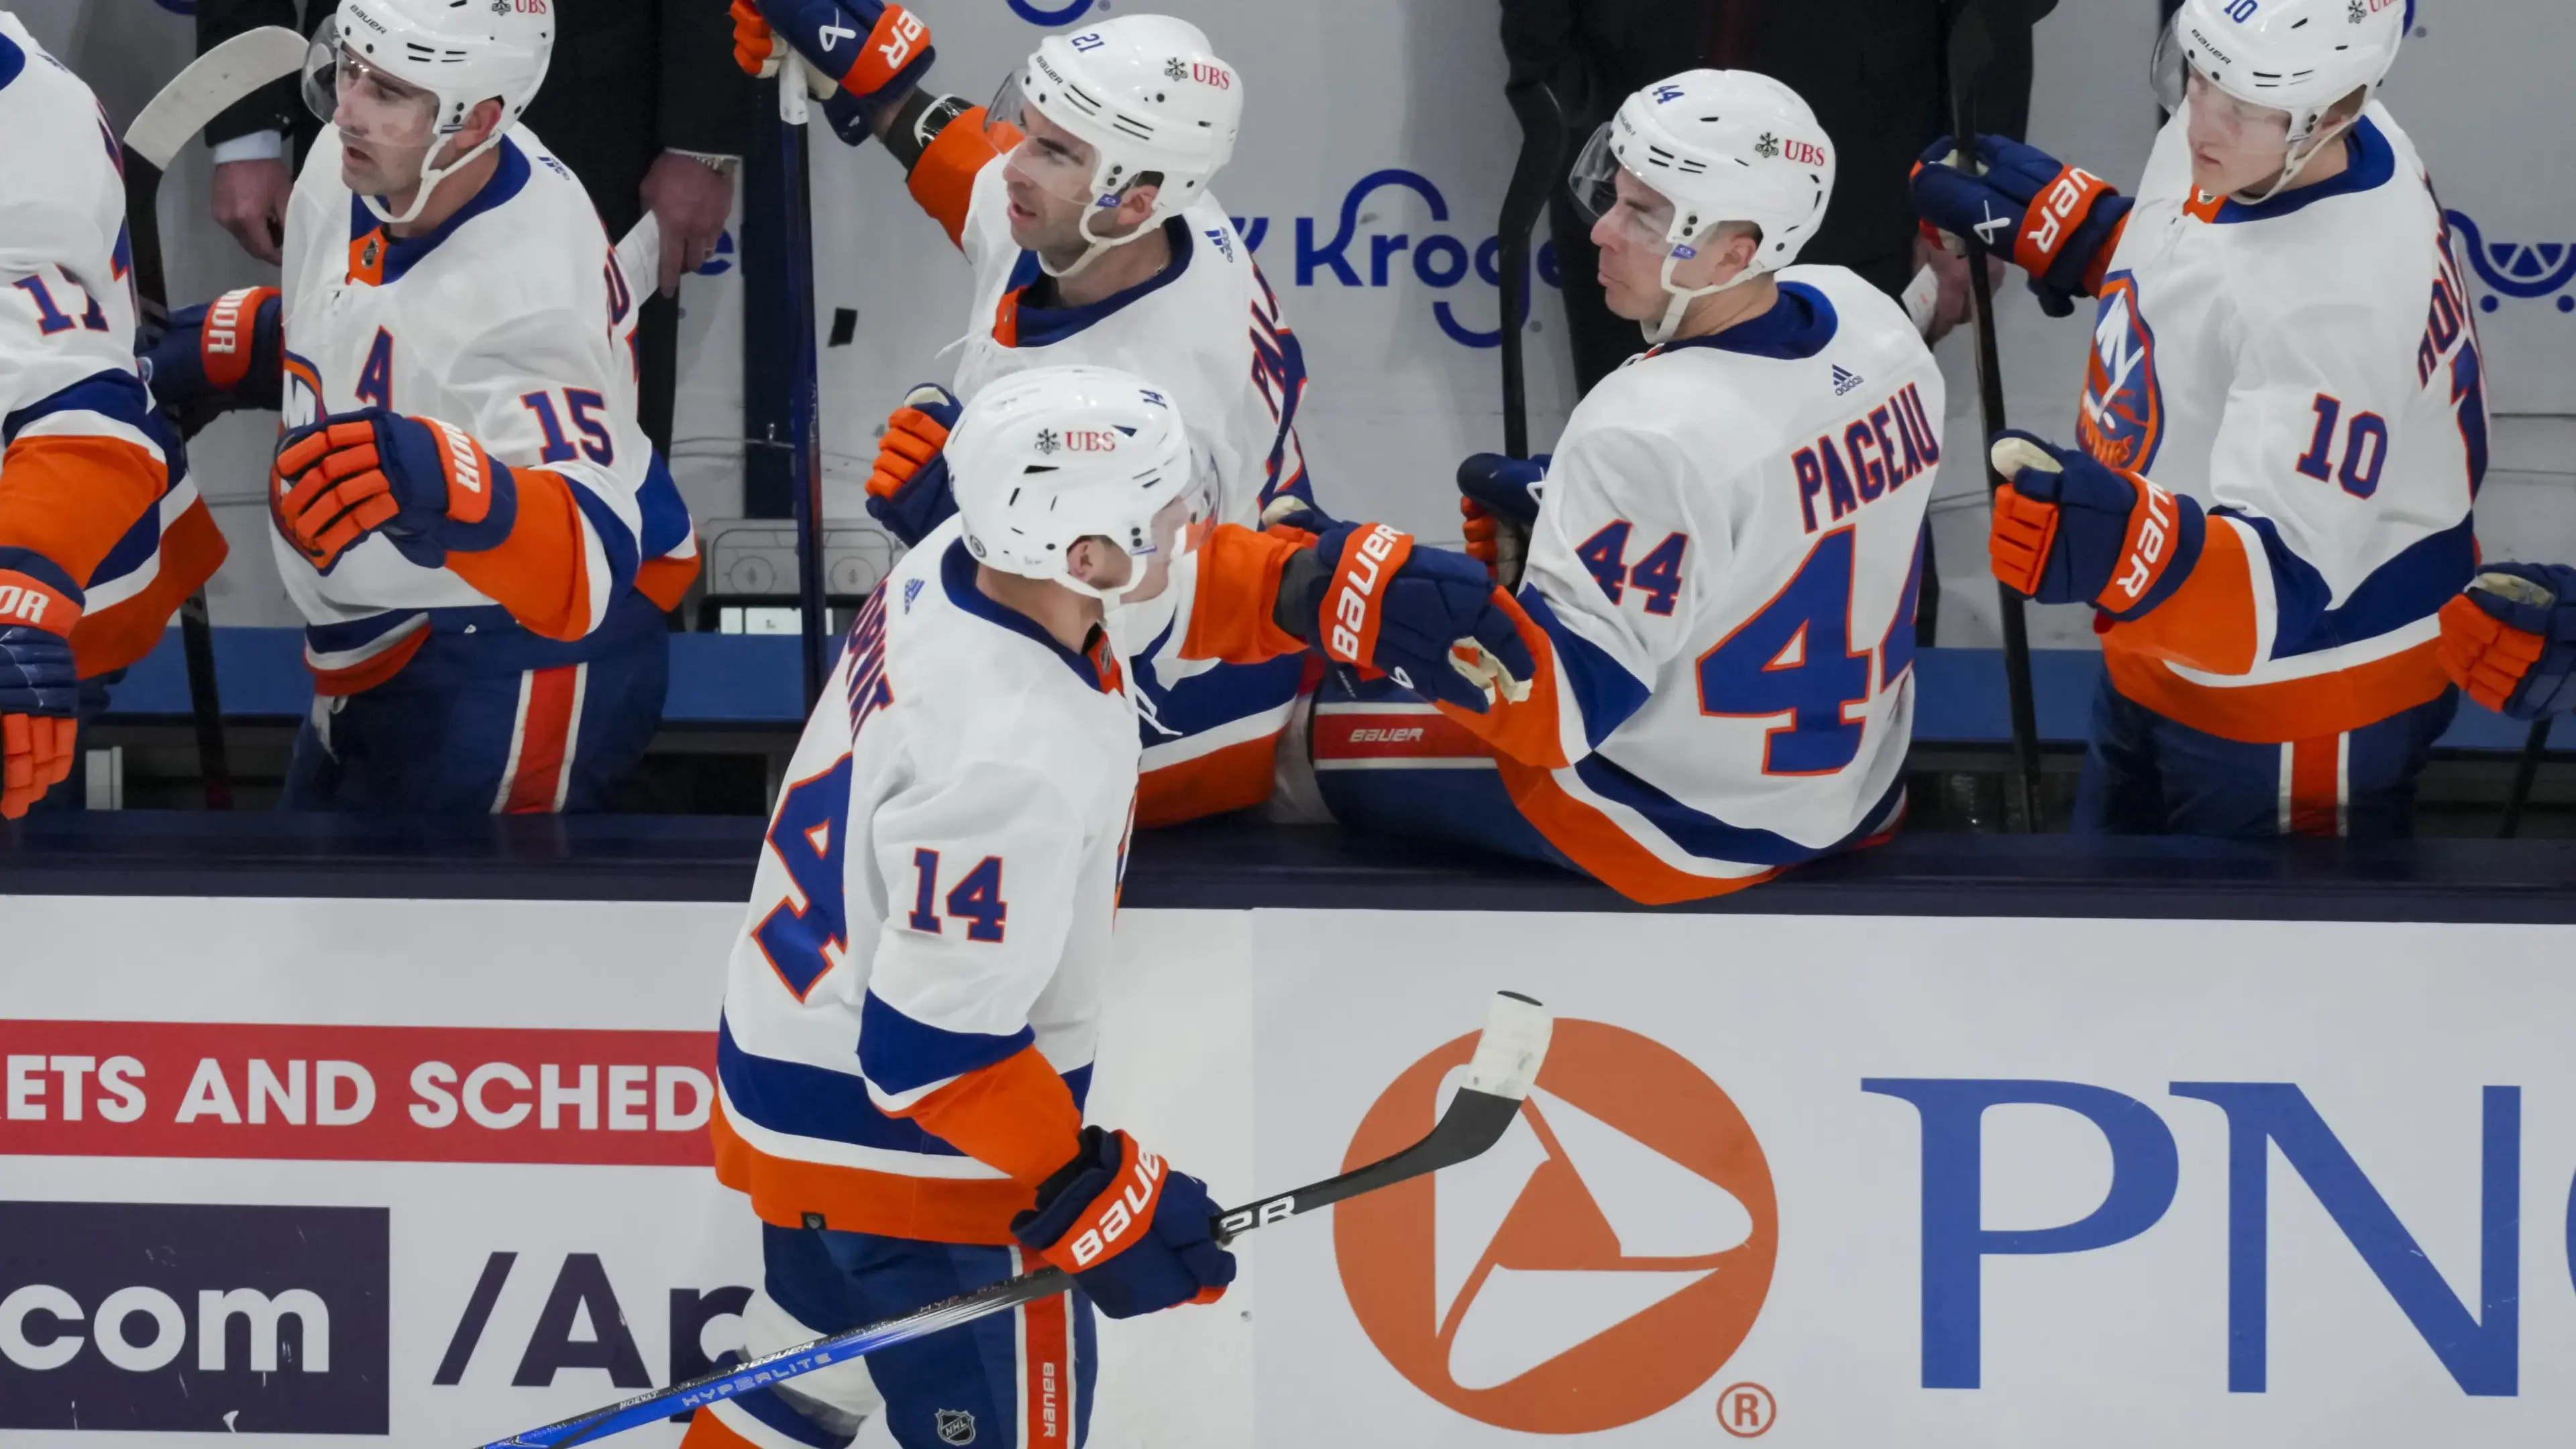 New York Islanders center Bo Horvat (14) celebrates with teammates after scoring a goal against the Columbus Blue Jackets in the first period at Nationwide Arena / Aaron Doster - USA Today Sports